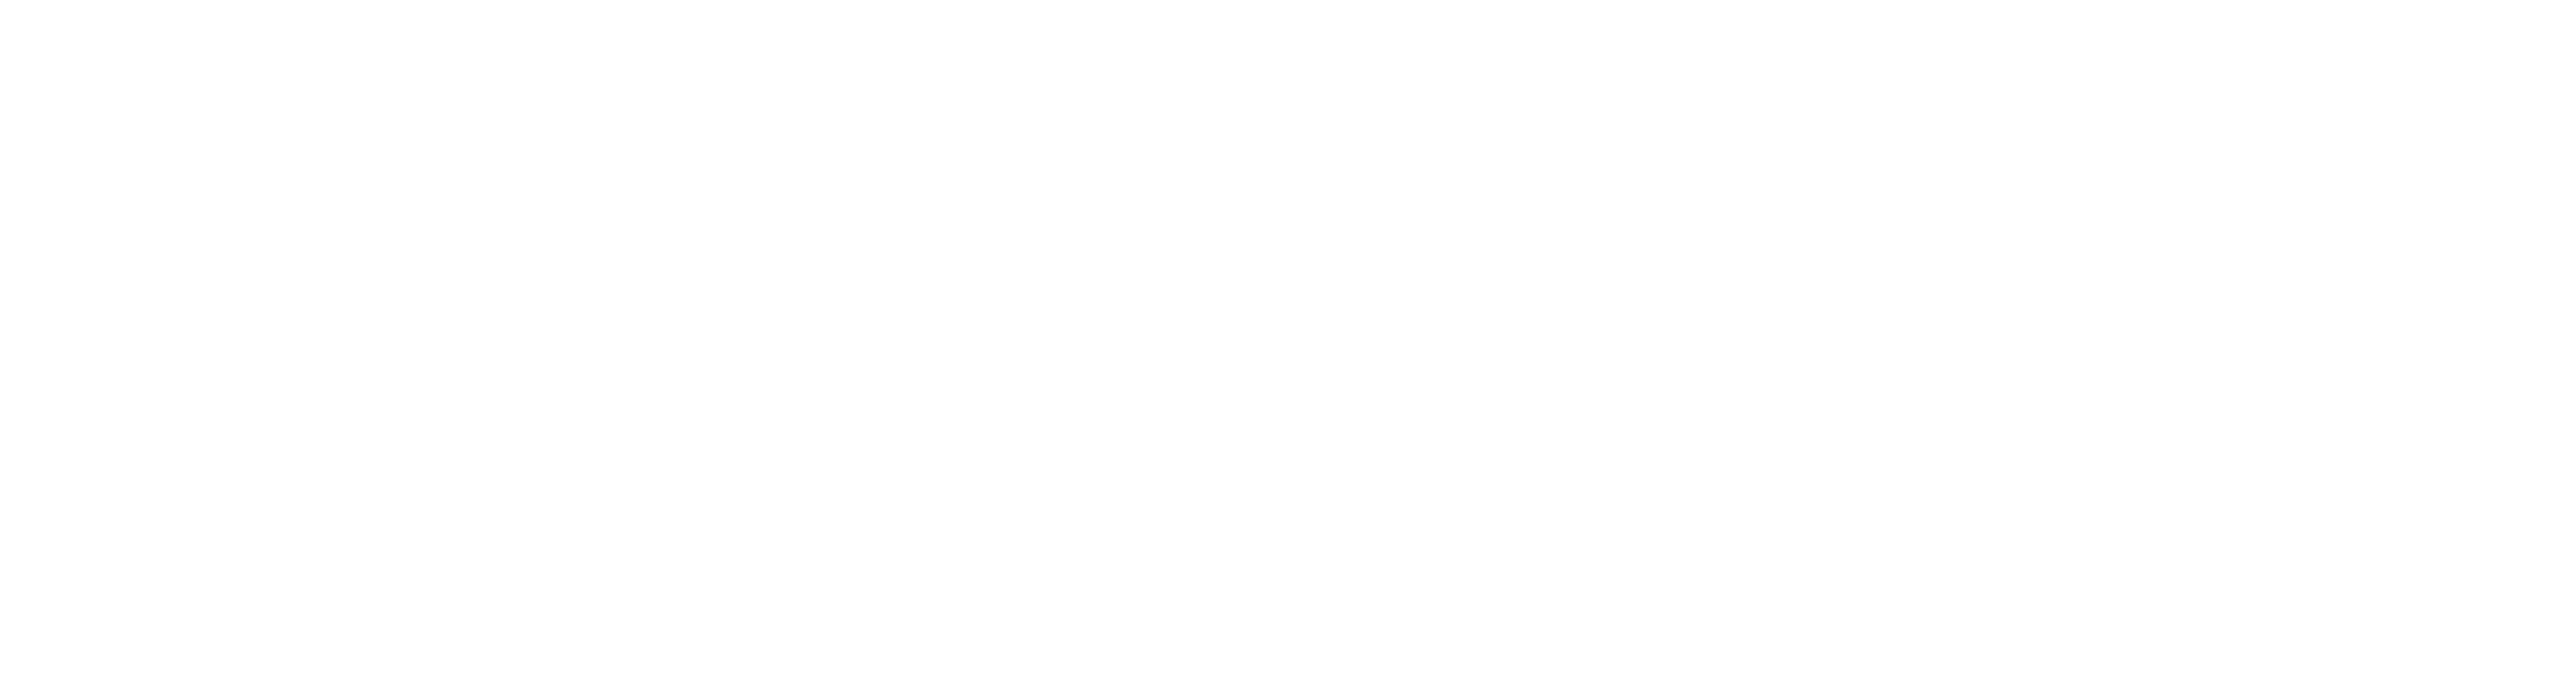 FlightBridgeED - Pre-hospital, critical care and emergency medicine education for nurses and paramedics - FP-C, CCP-C, CFRN, CTRN, TCRN, C-NPT Exam Review Course, Continuing Education, CE hours, CAPCE, BCEN, AANP